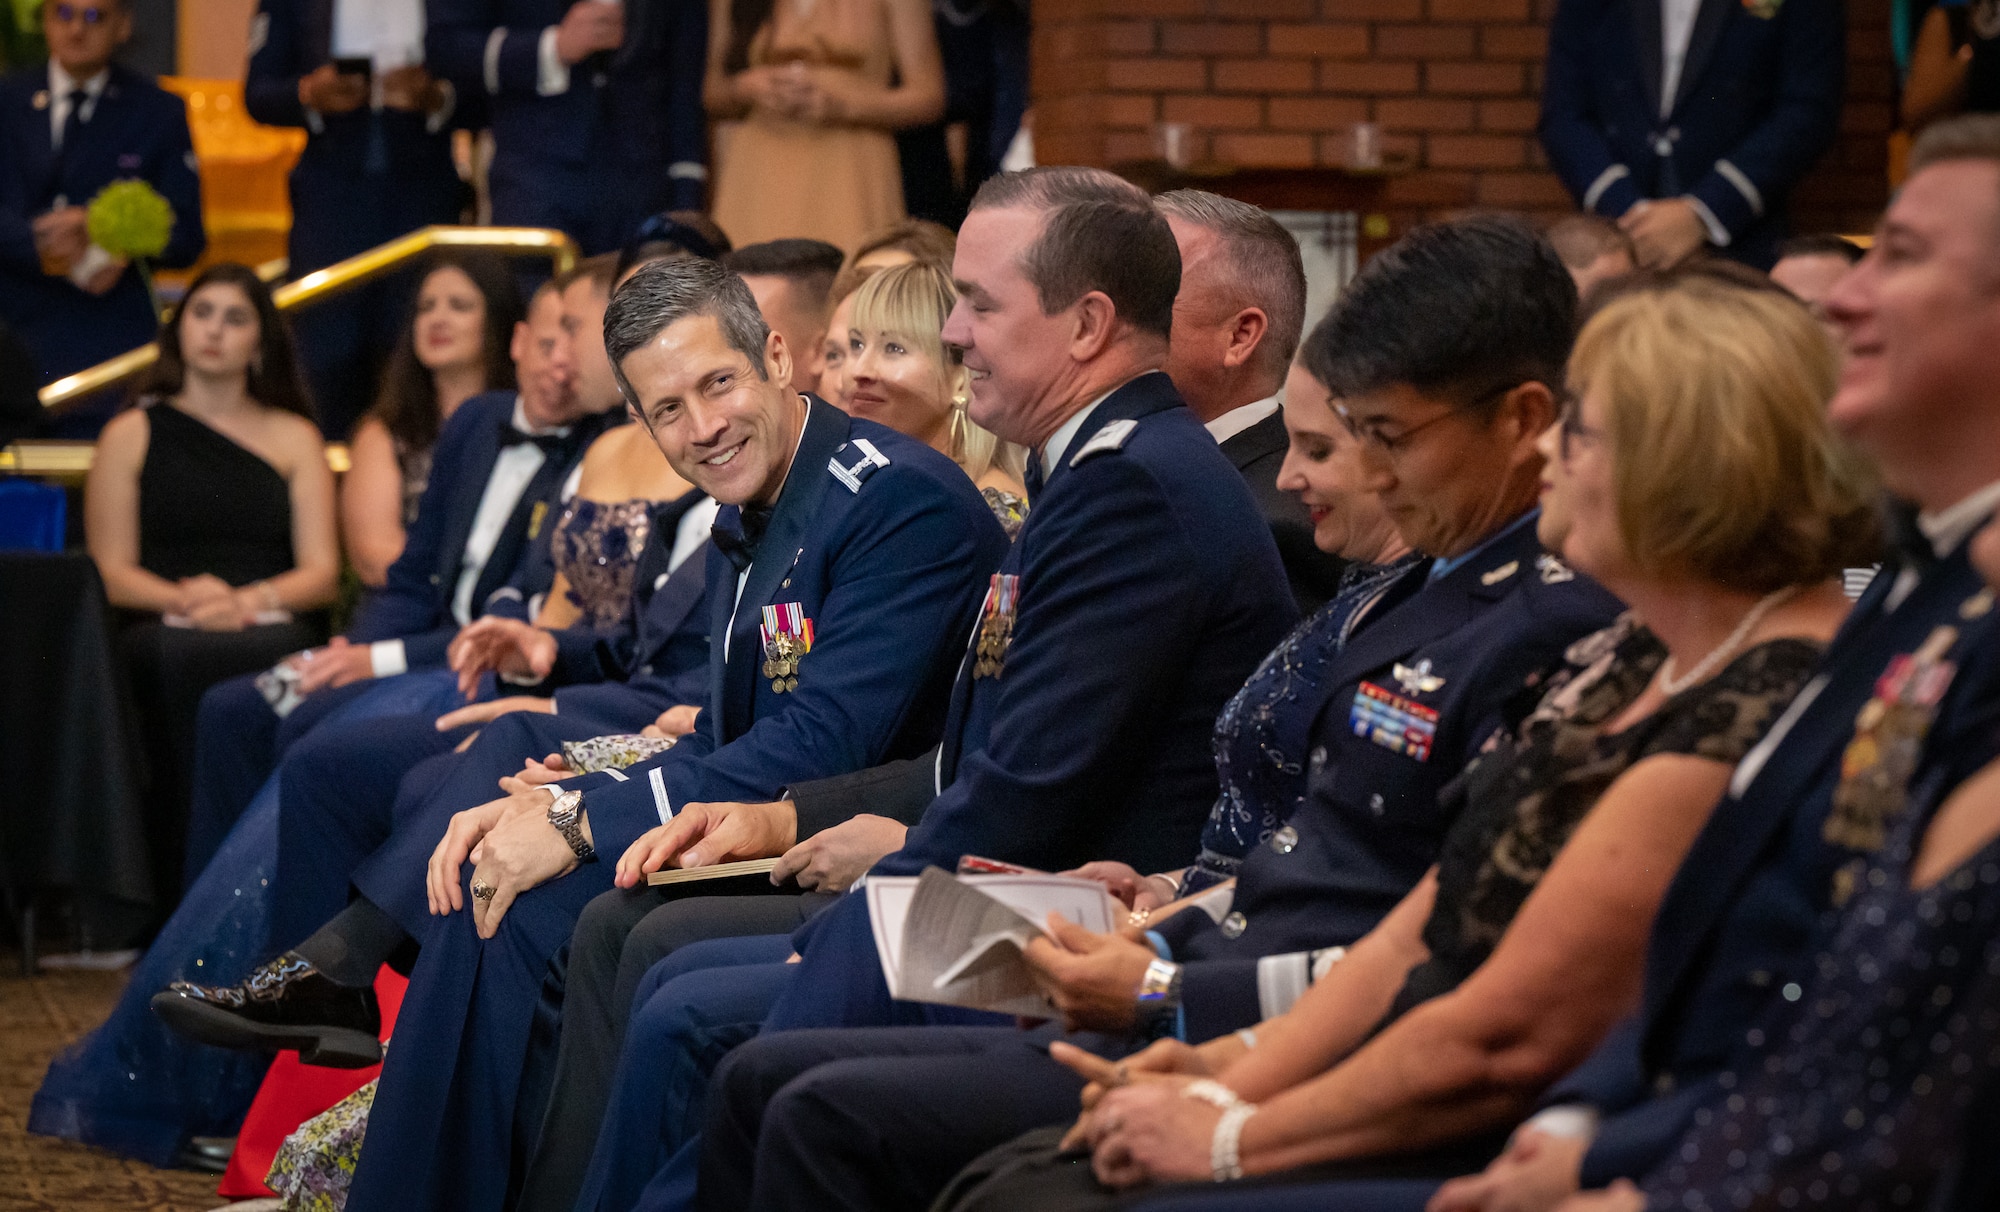 U.S. Air Force Col. William McKibban, 51st Fighter Wing commander, smiles while seated amongst distinguished guests during the 76th Air Force Ball at U.S. Army Garrison Yongsan, Republic of Korea, Sept. 23, 2023. The ball commemorated the 76th anniversary of the U.S. Air Force and the legacy of its members, who continue to dedicate time and service to inspire future generations. (U.S. Air Force photo by Staff Sgt. Kelsea Caballero)